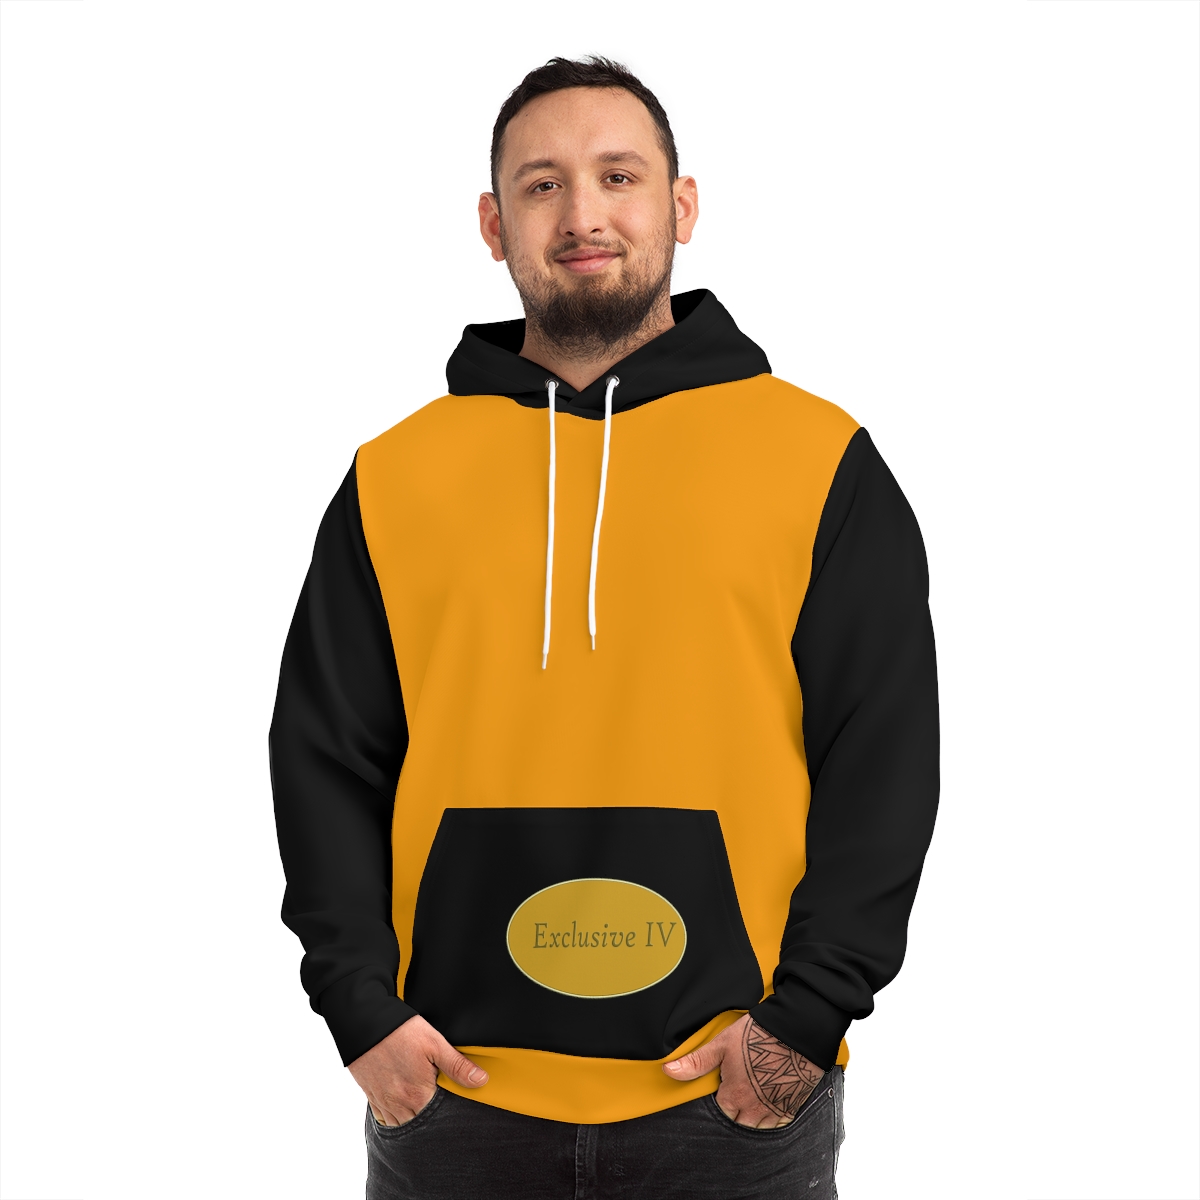 Exclusive IV Hoodie product thumbnail image